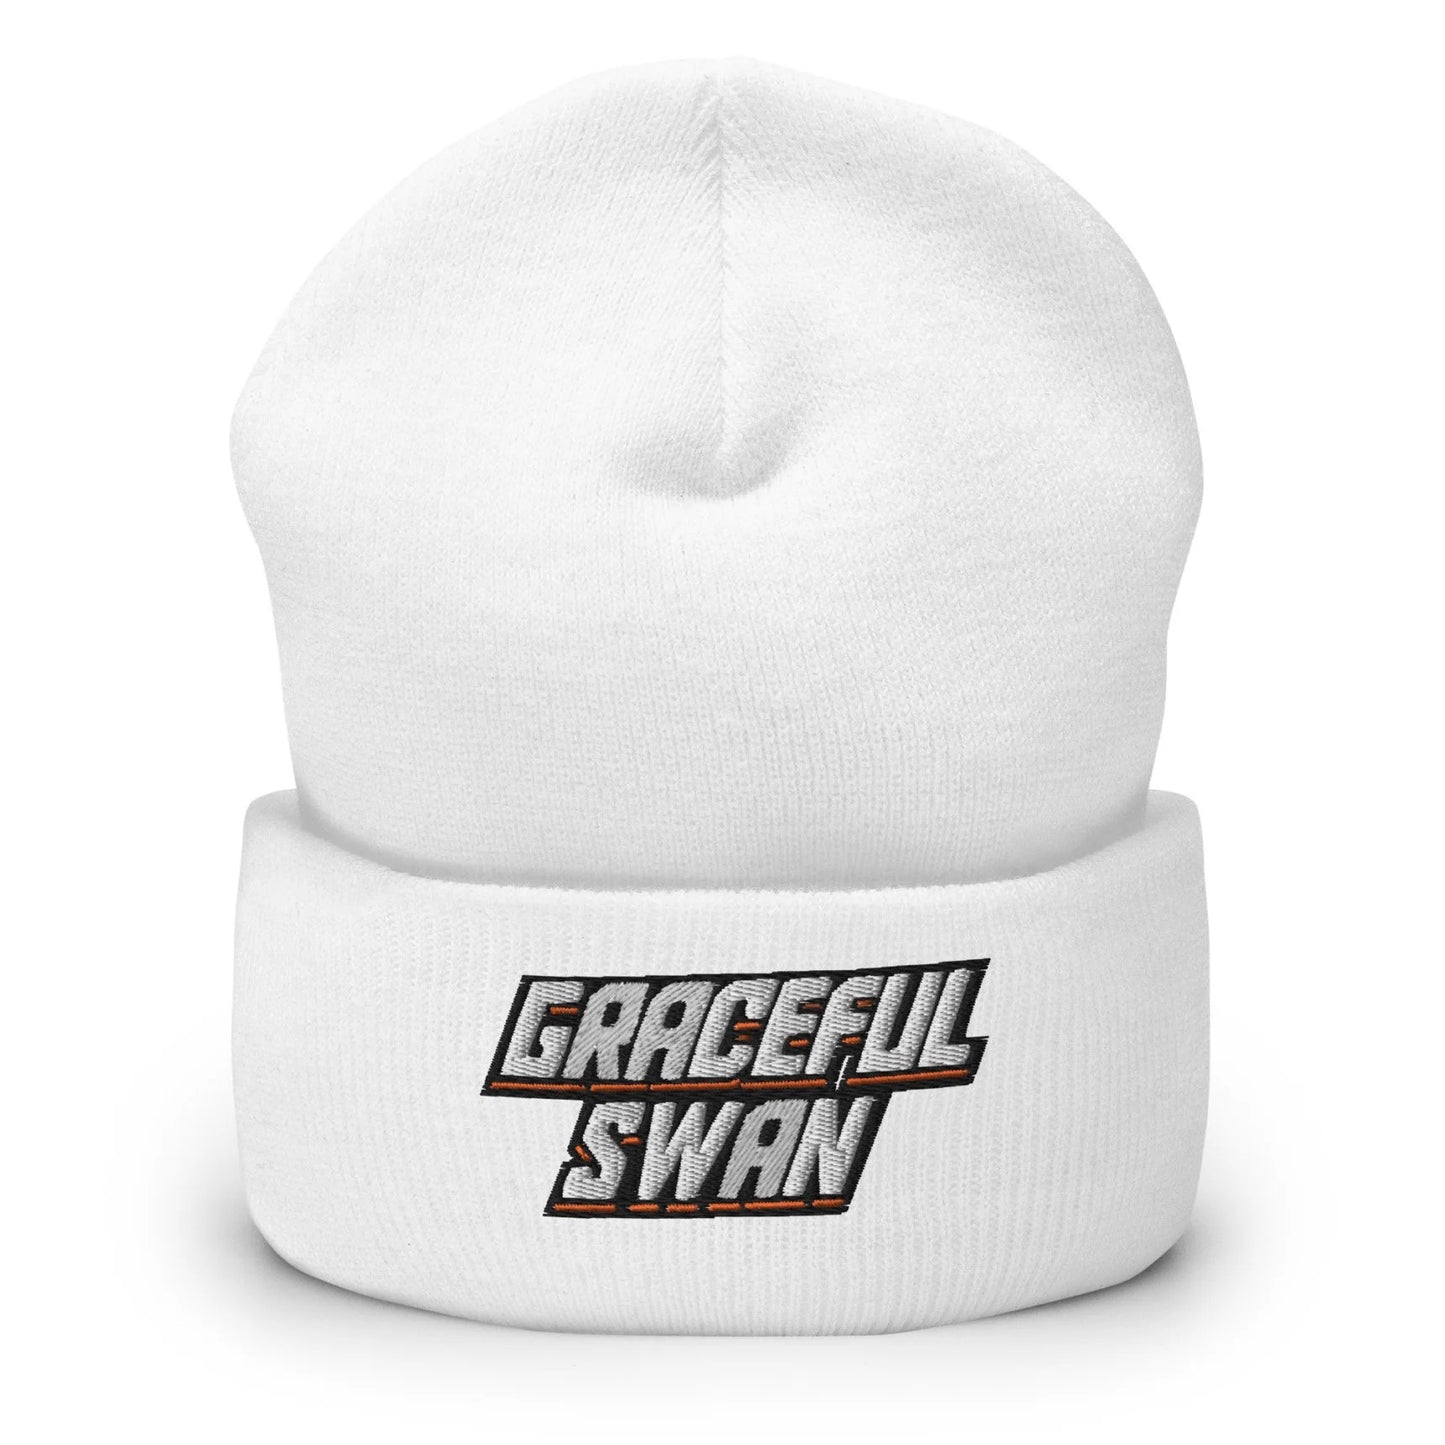 Graceful Swan Beanie by ShowZone in white with text logo